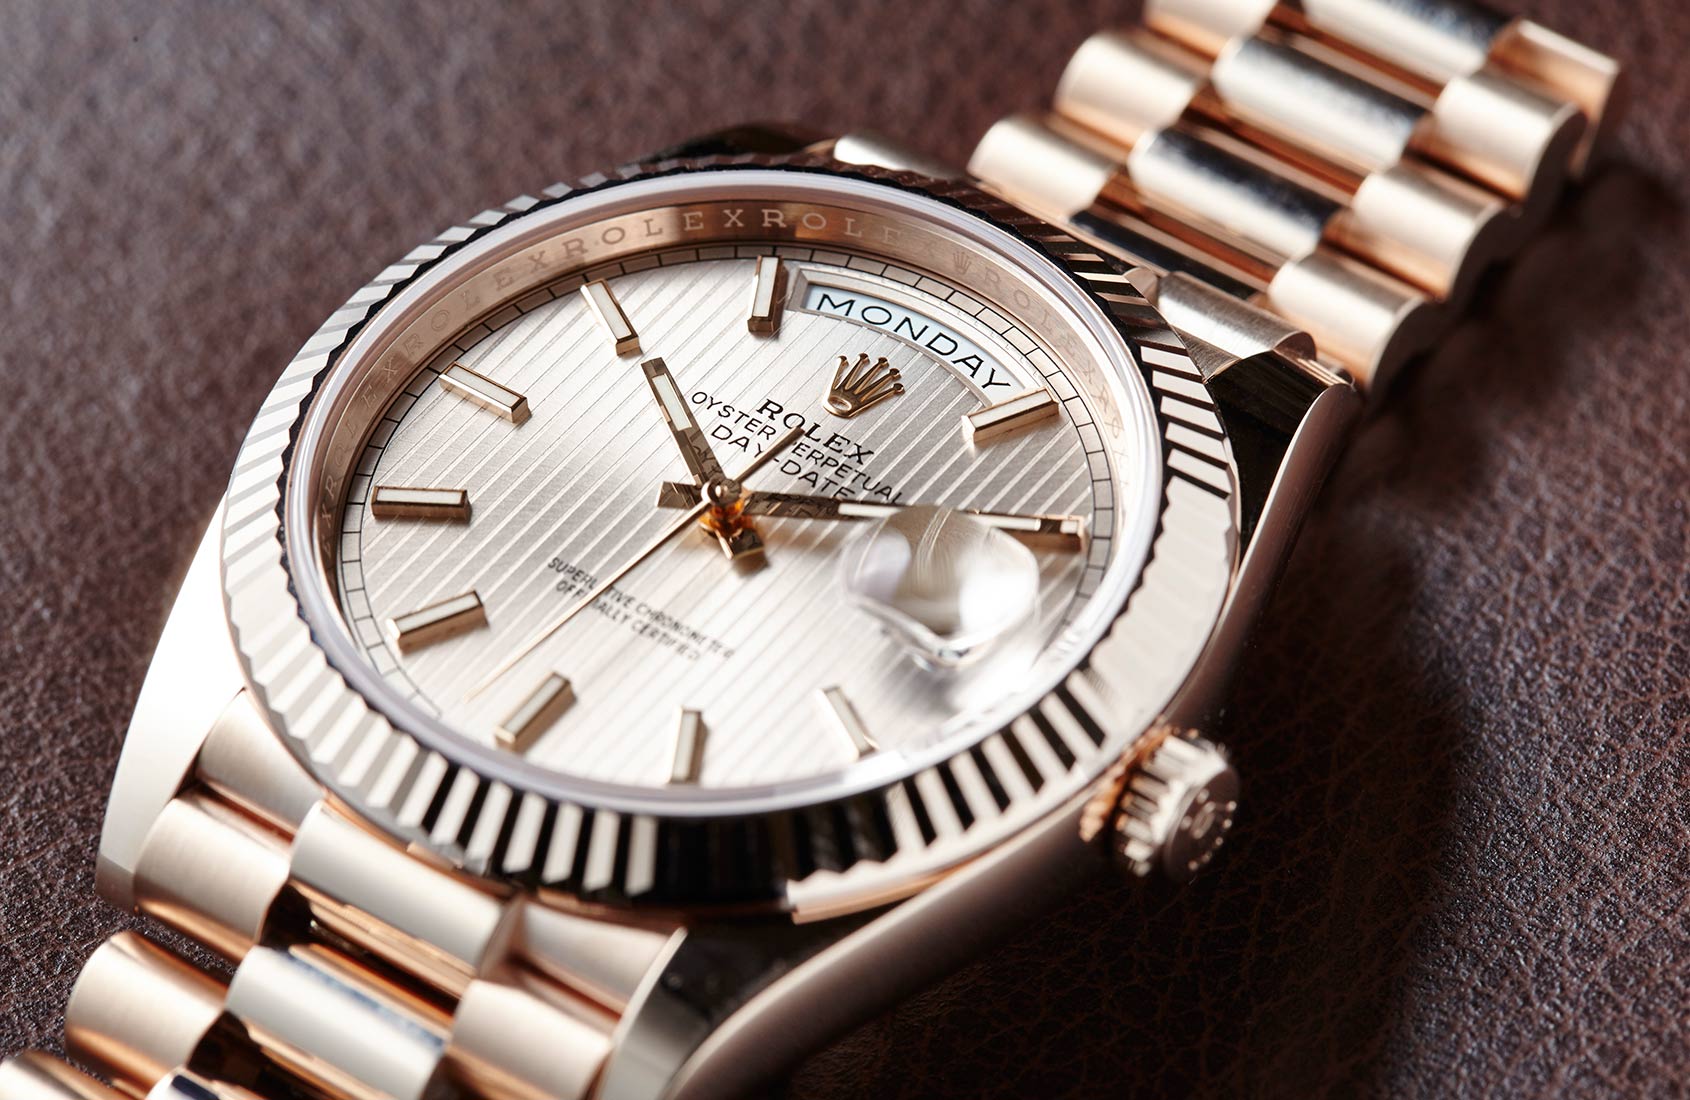 Rolex Oyster Perpetual Day-Date 40 Ref. 228235 with Calibre 3255